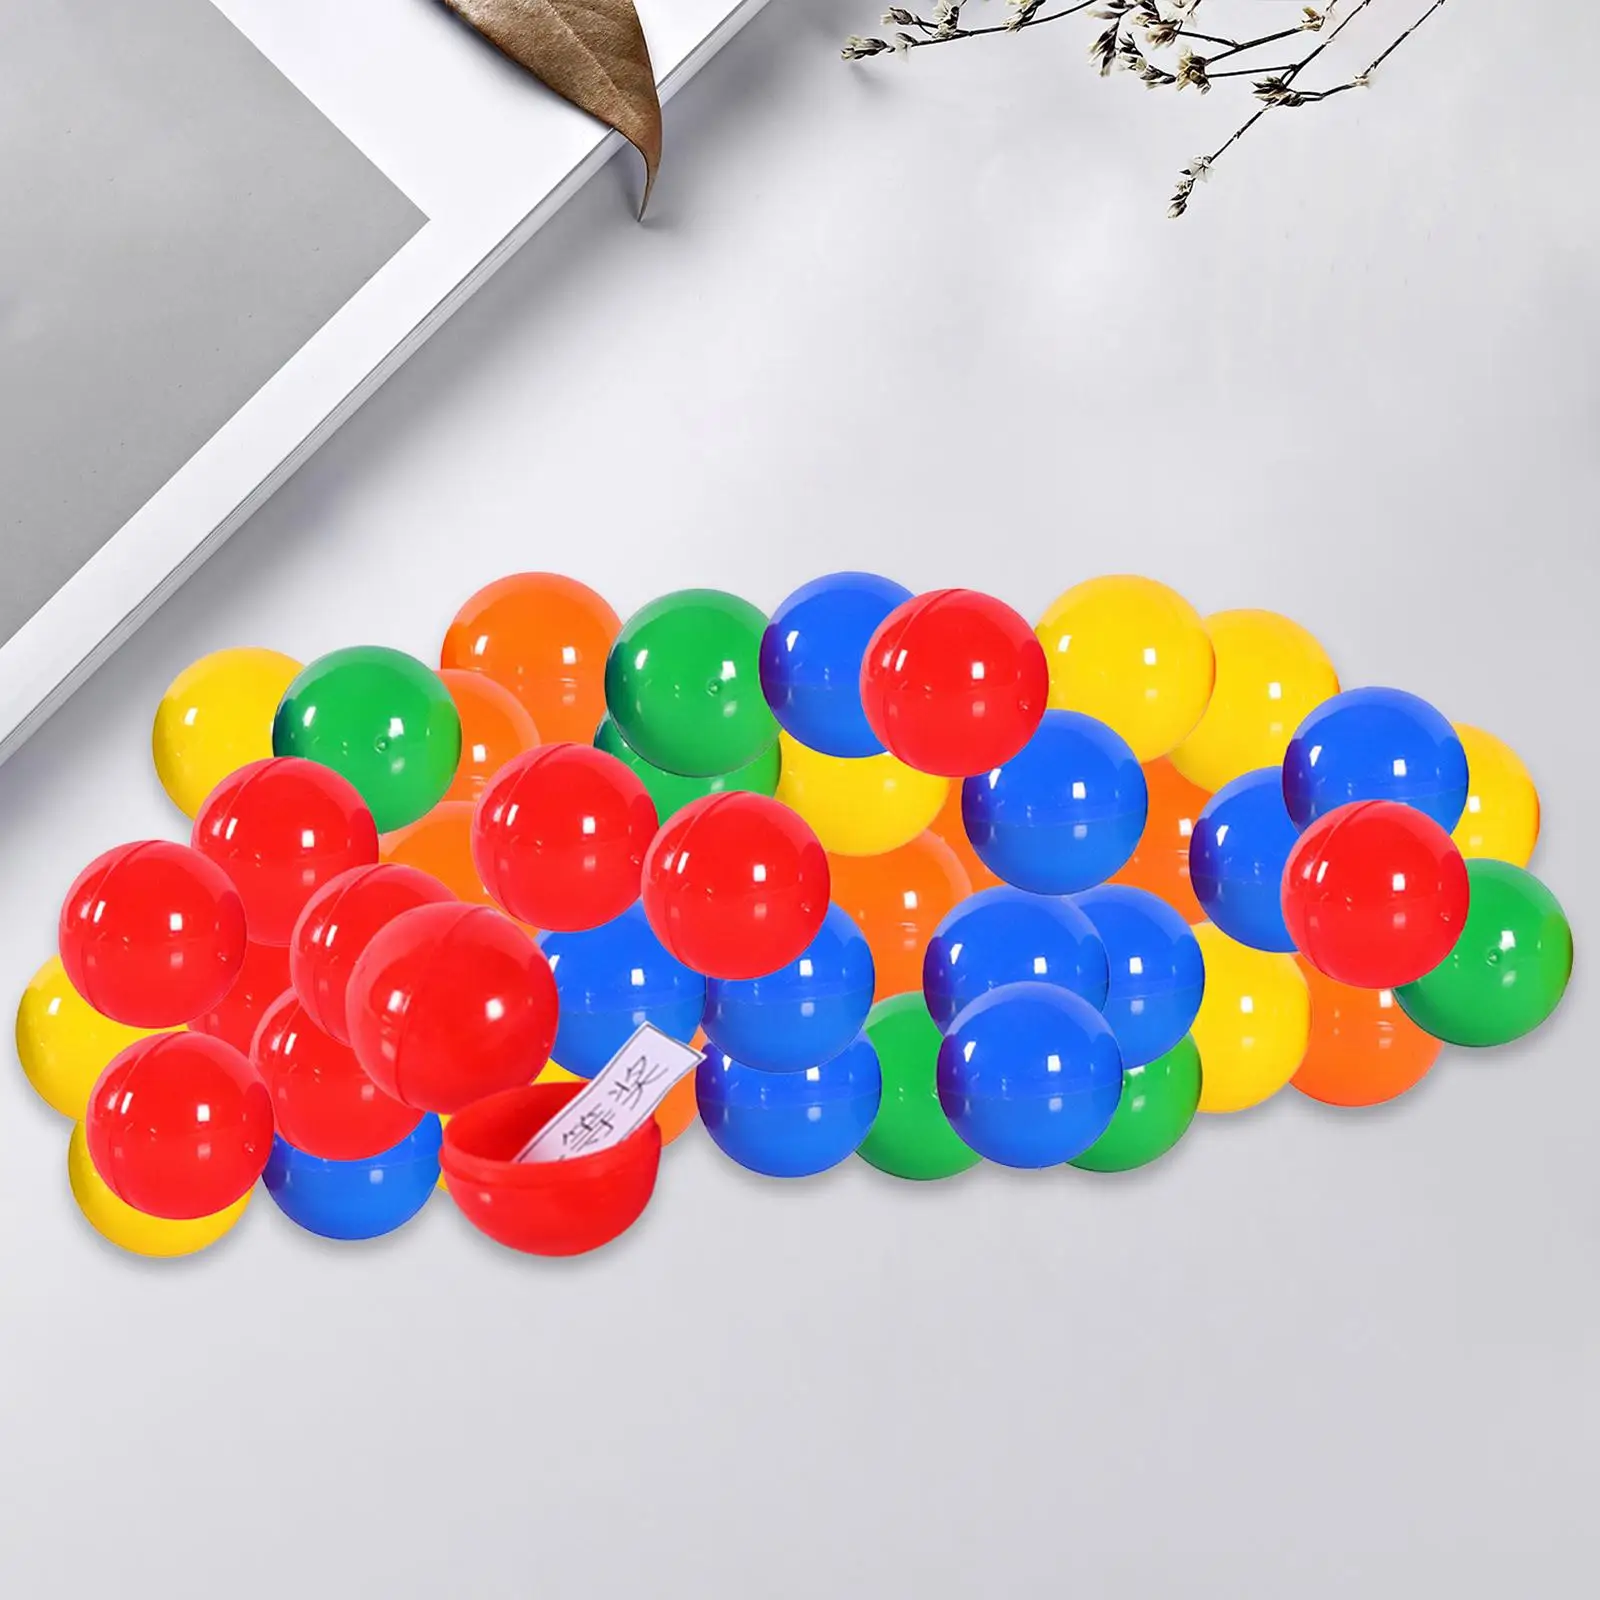 50 Pieces Bingo Ball Portable Direct Replaces Fittings Tally Ball for Company Large Group Games Camping Household Entertainment